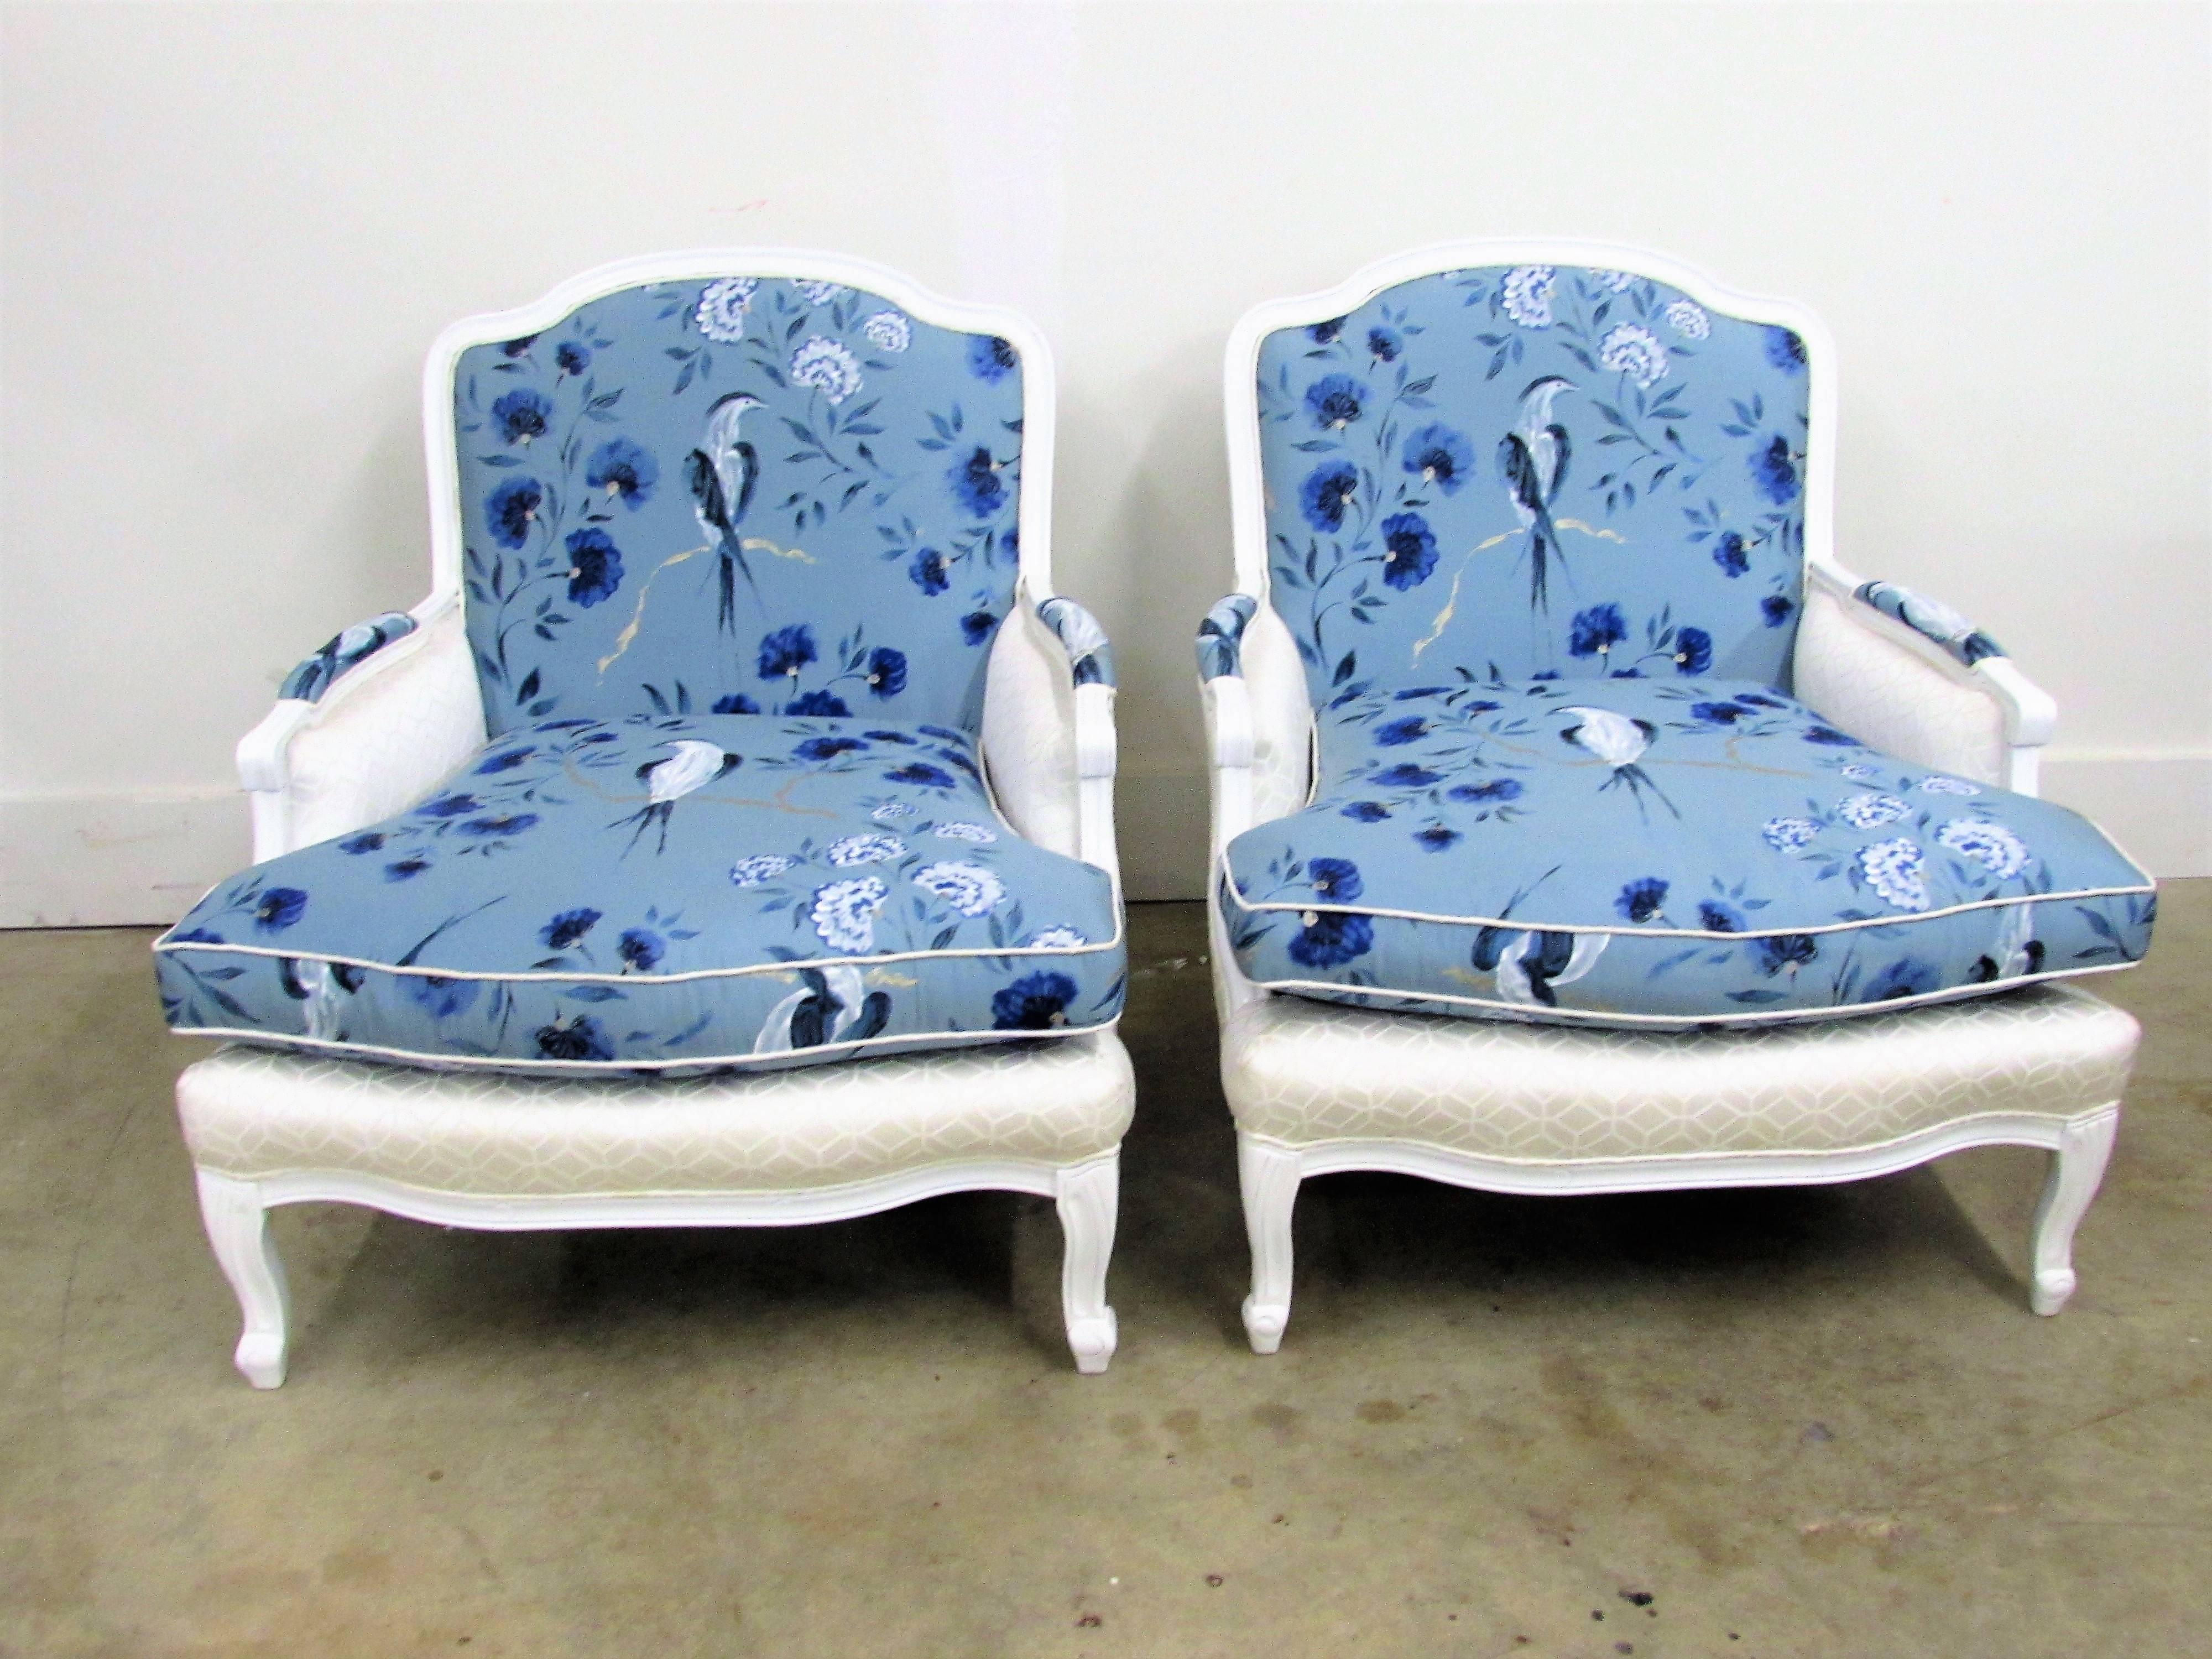 Elegant pair of French mahogany Bergère armchairs in white lacquer and designers Guild Jacaranda-Indigo 100% silk fabric with elegant birds perching on delightfully hand-painted branches of oriental blossoms in rich vibrant colors in blue and white,